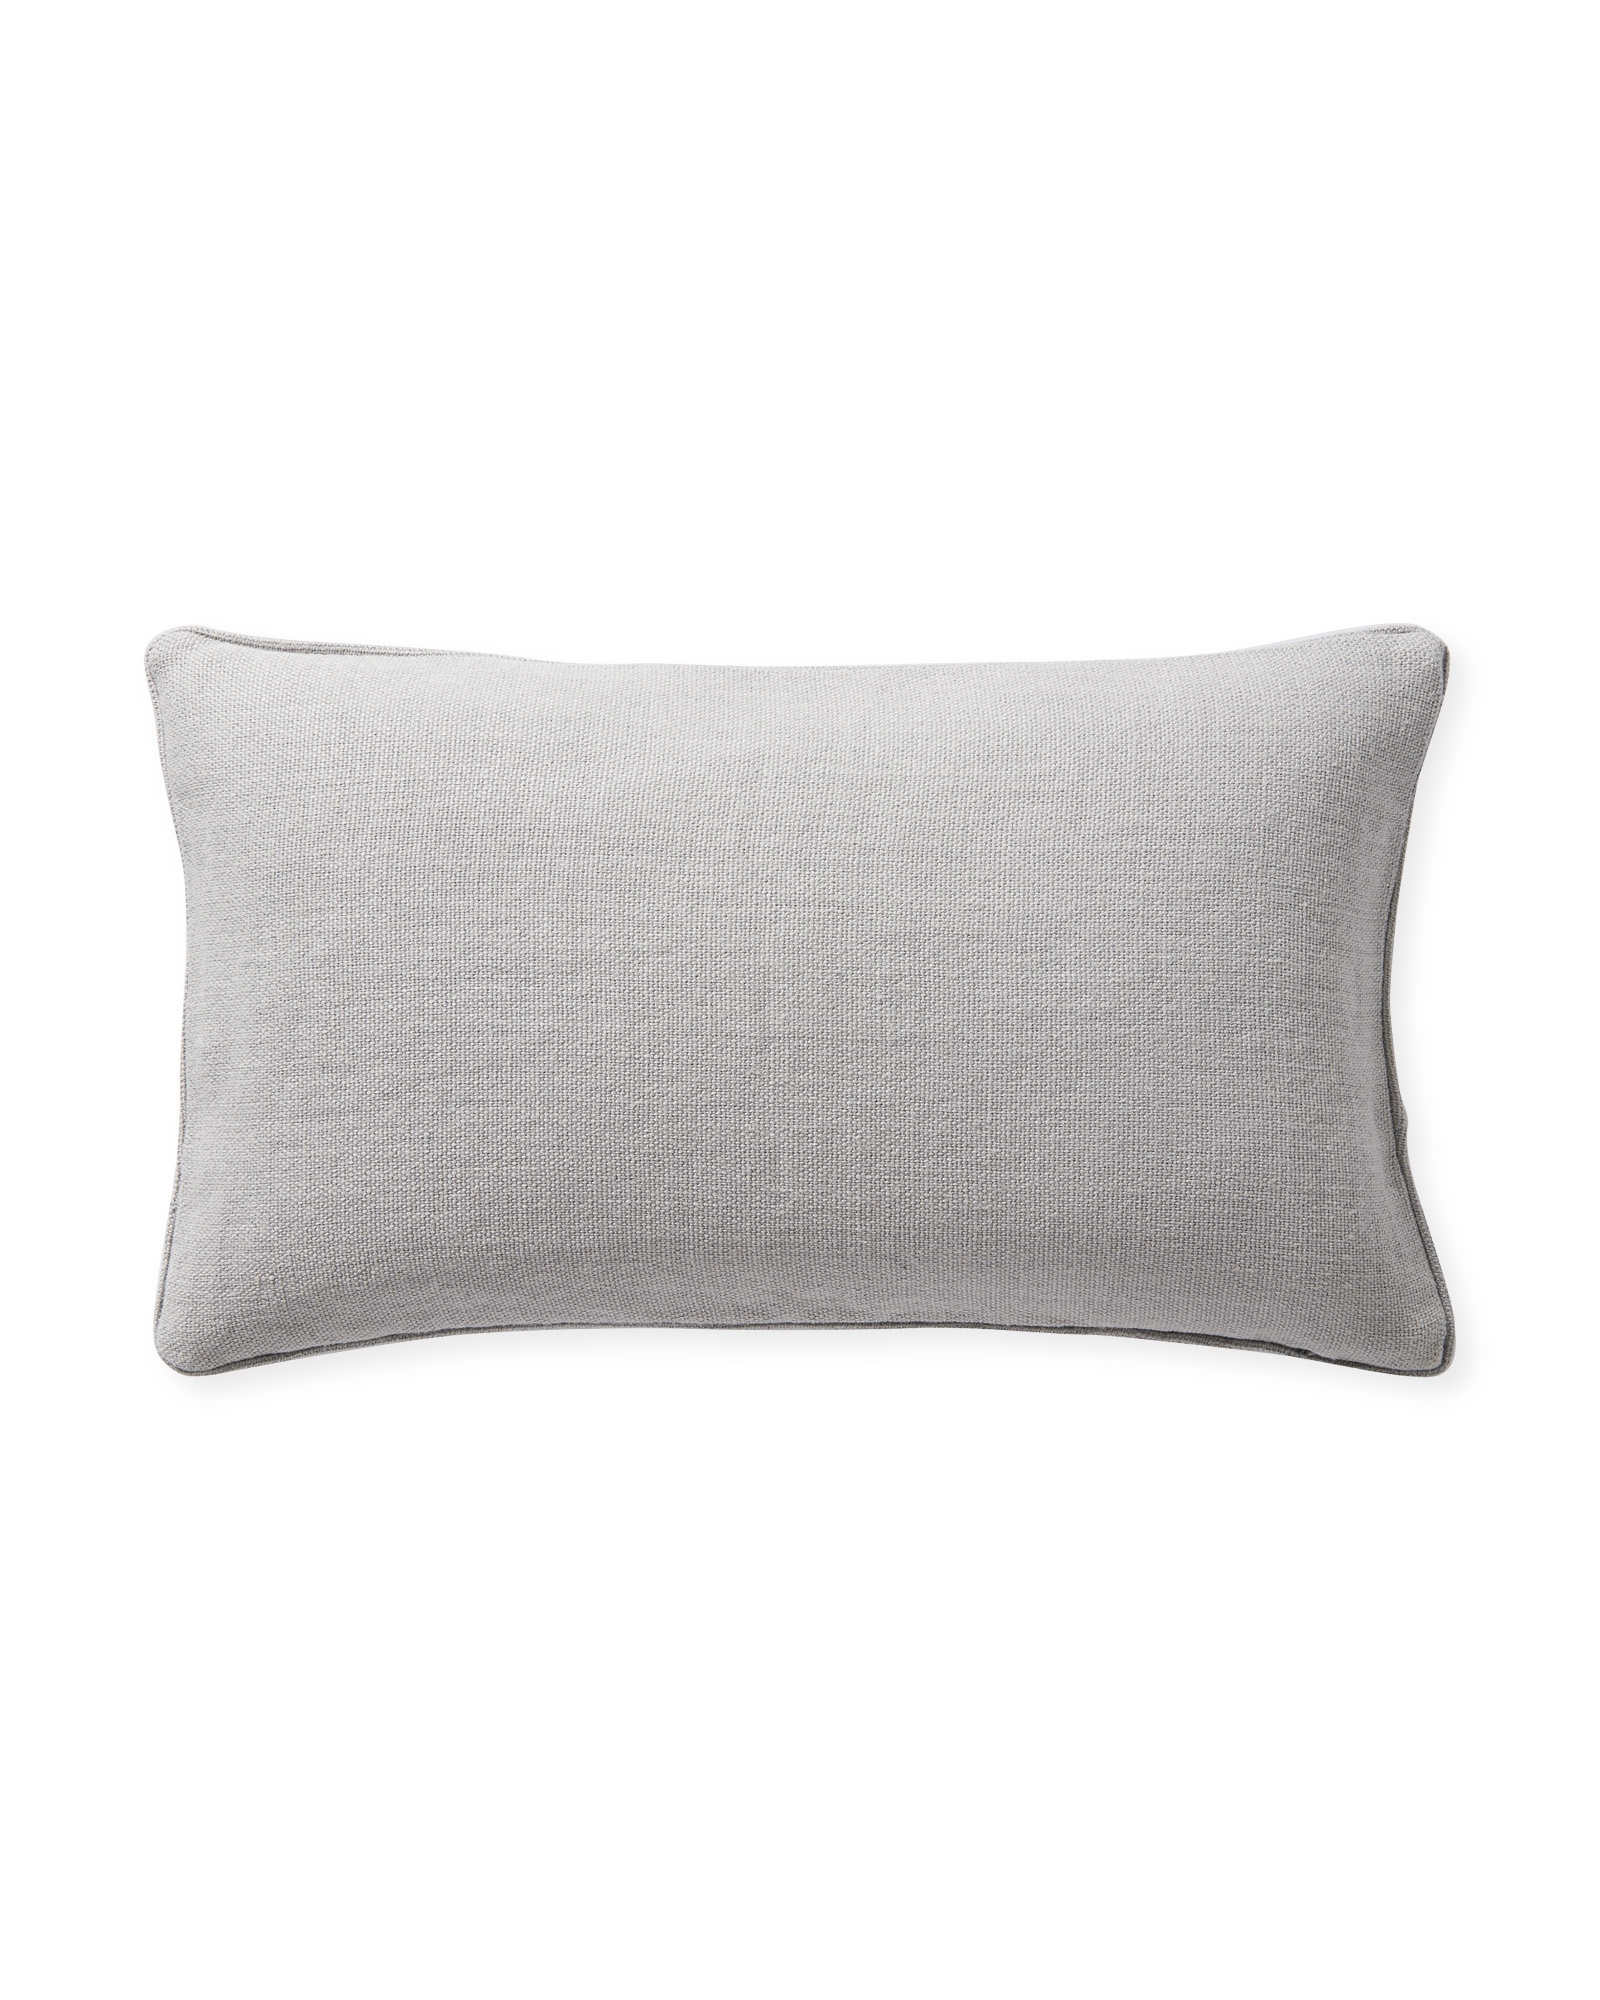 Jetty Pillow Cover - Smoke - Insert sold separately - Image 1